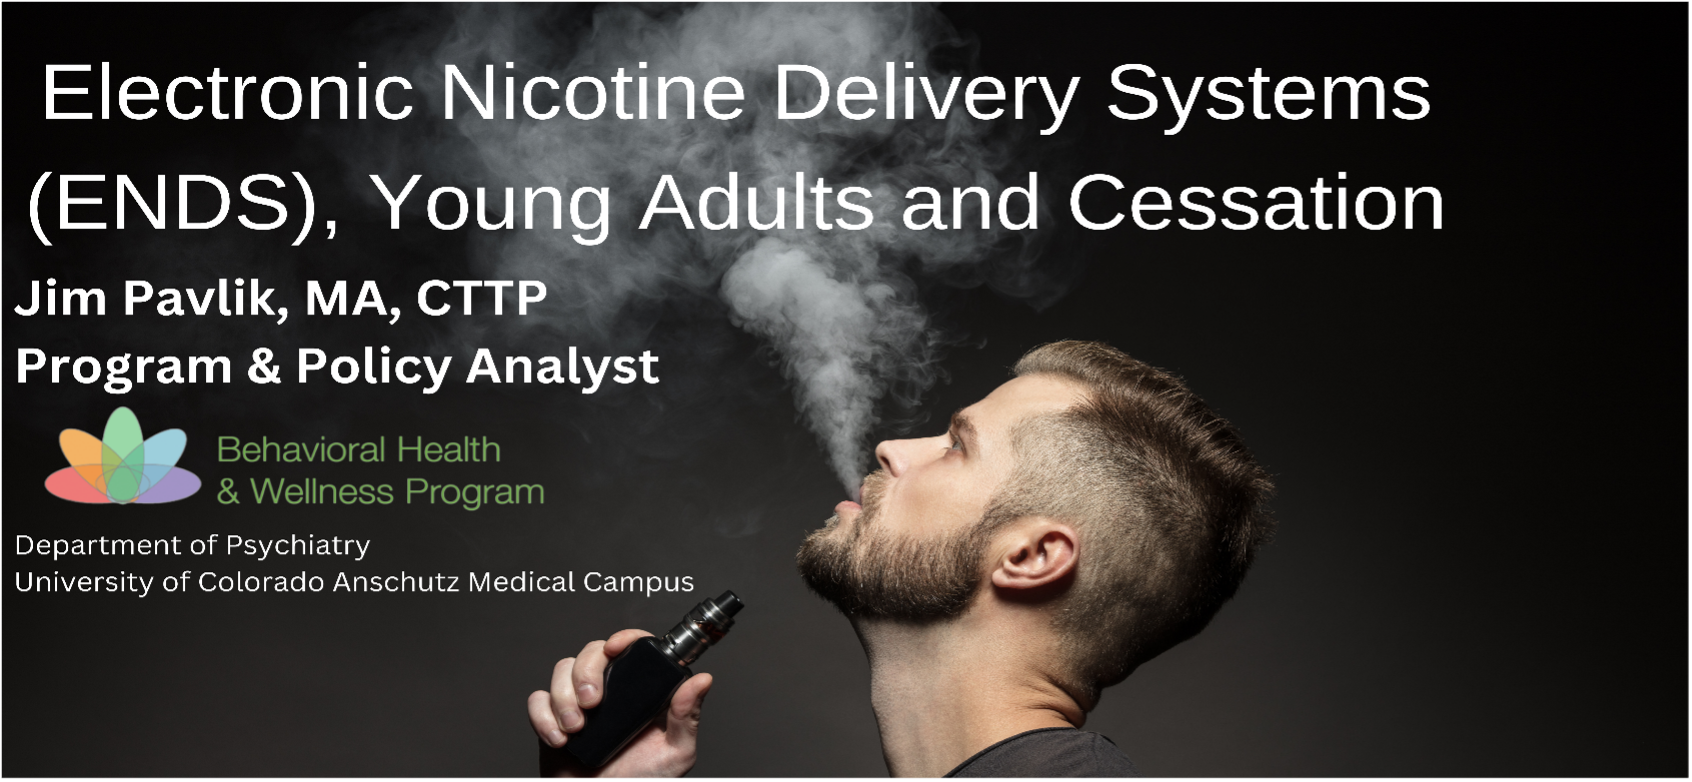 Electronic Nicotine Delivery Systems (ENDS), Young Adults and Cessation